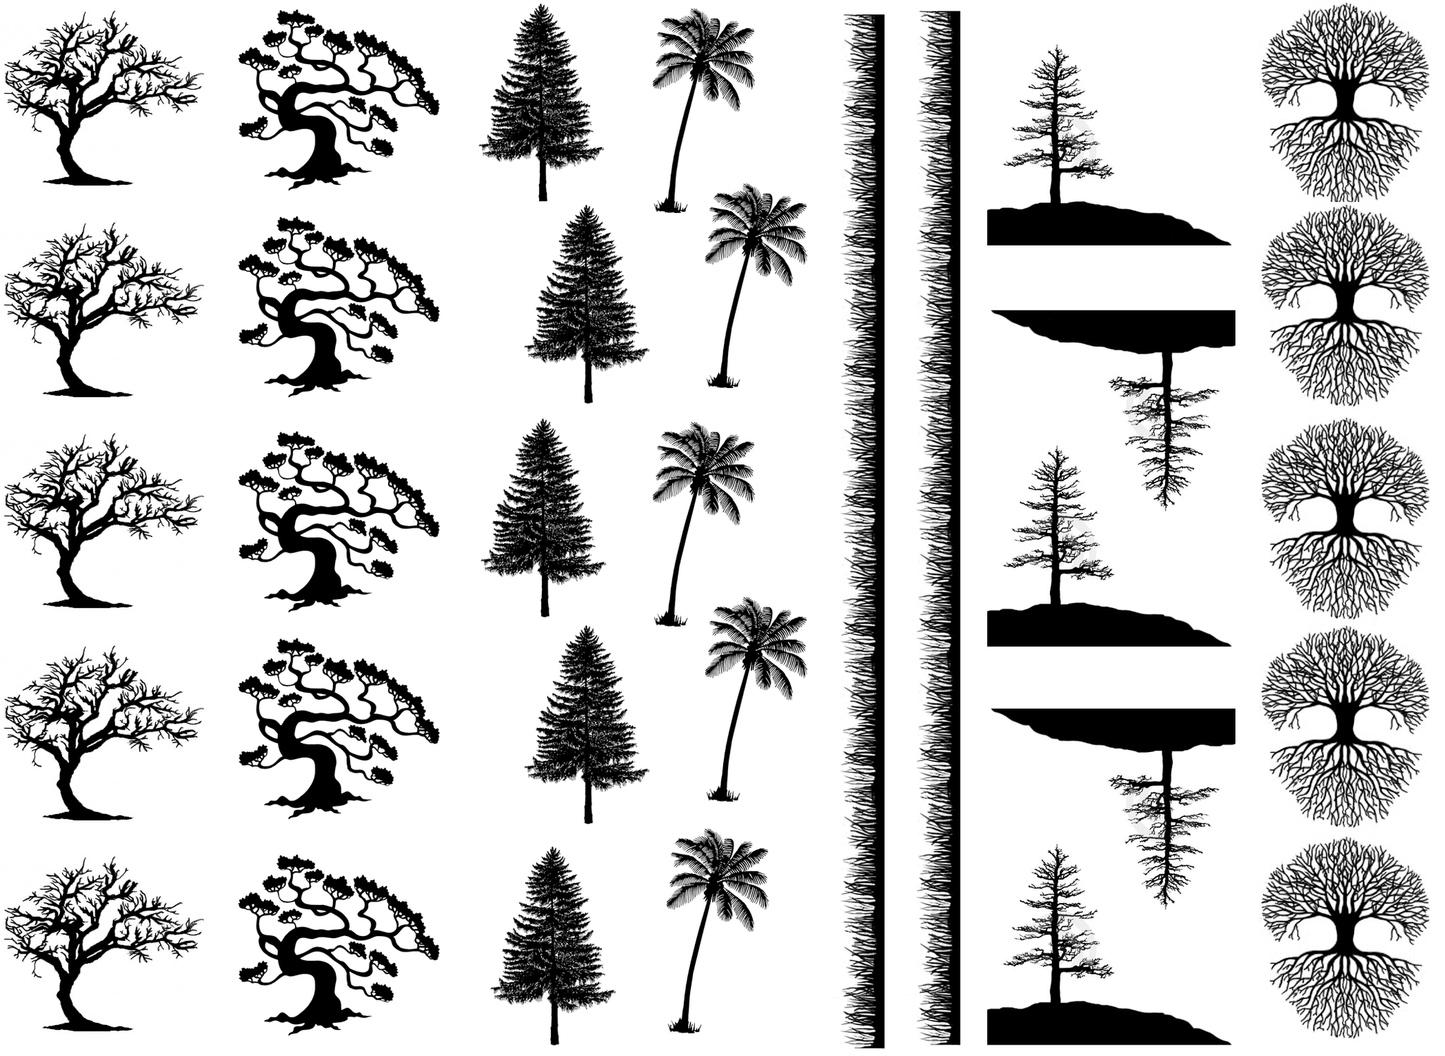 Trees Grass 32 pcs 1" to 1-1/4" Black Fused Glass Decals